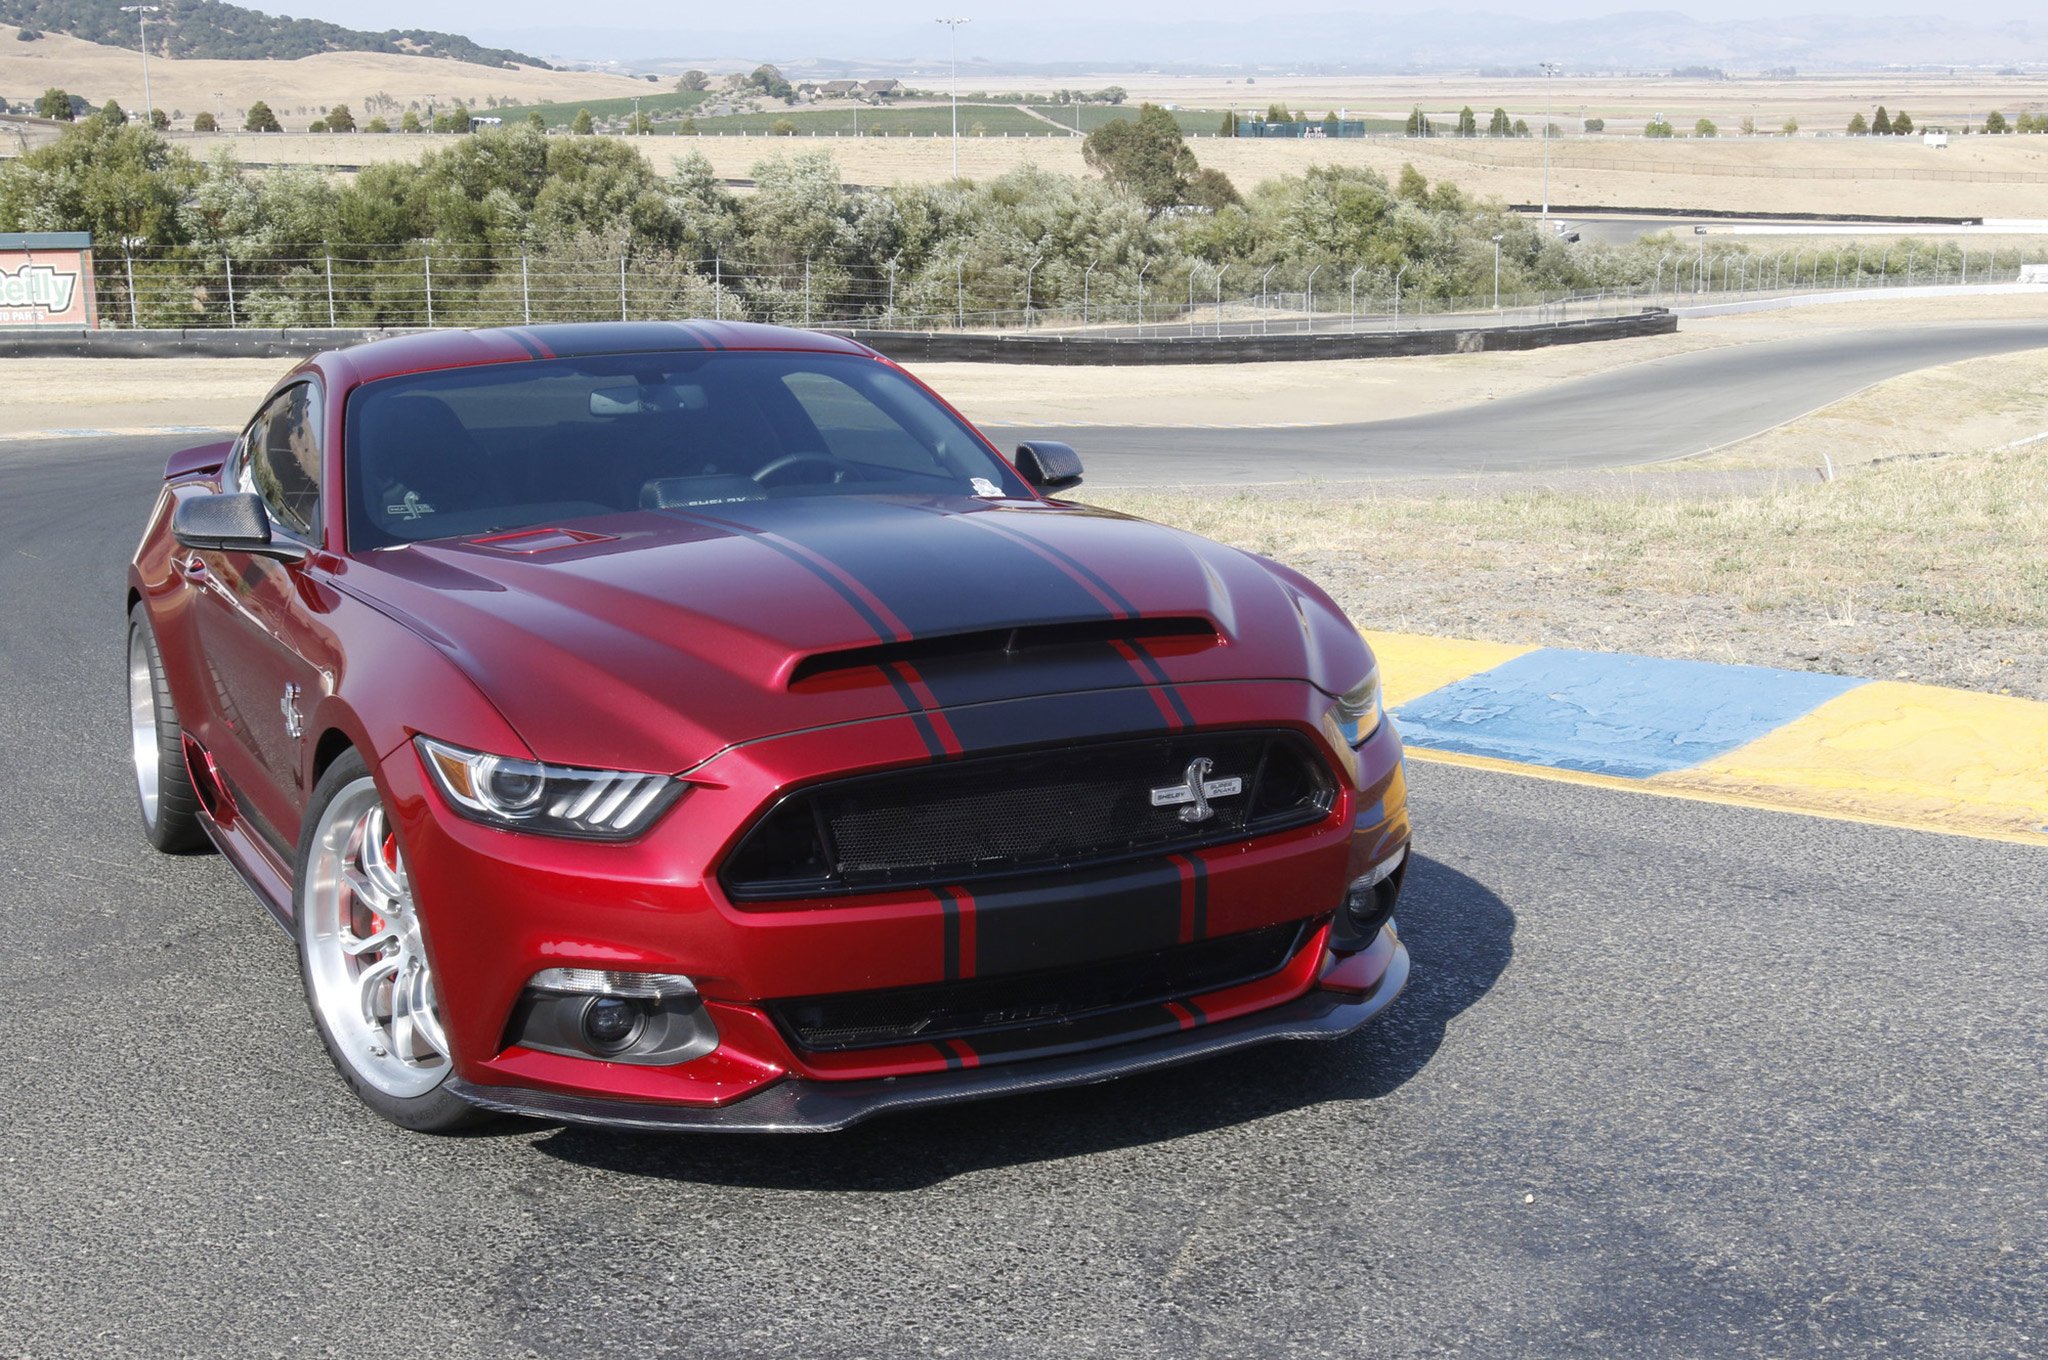 2015, Ford, Mustang, Shelby, Super snake, Super, Car, Street, Pro, Touring, Usa,  06 Wallpaper